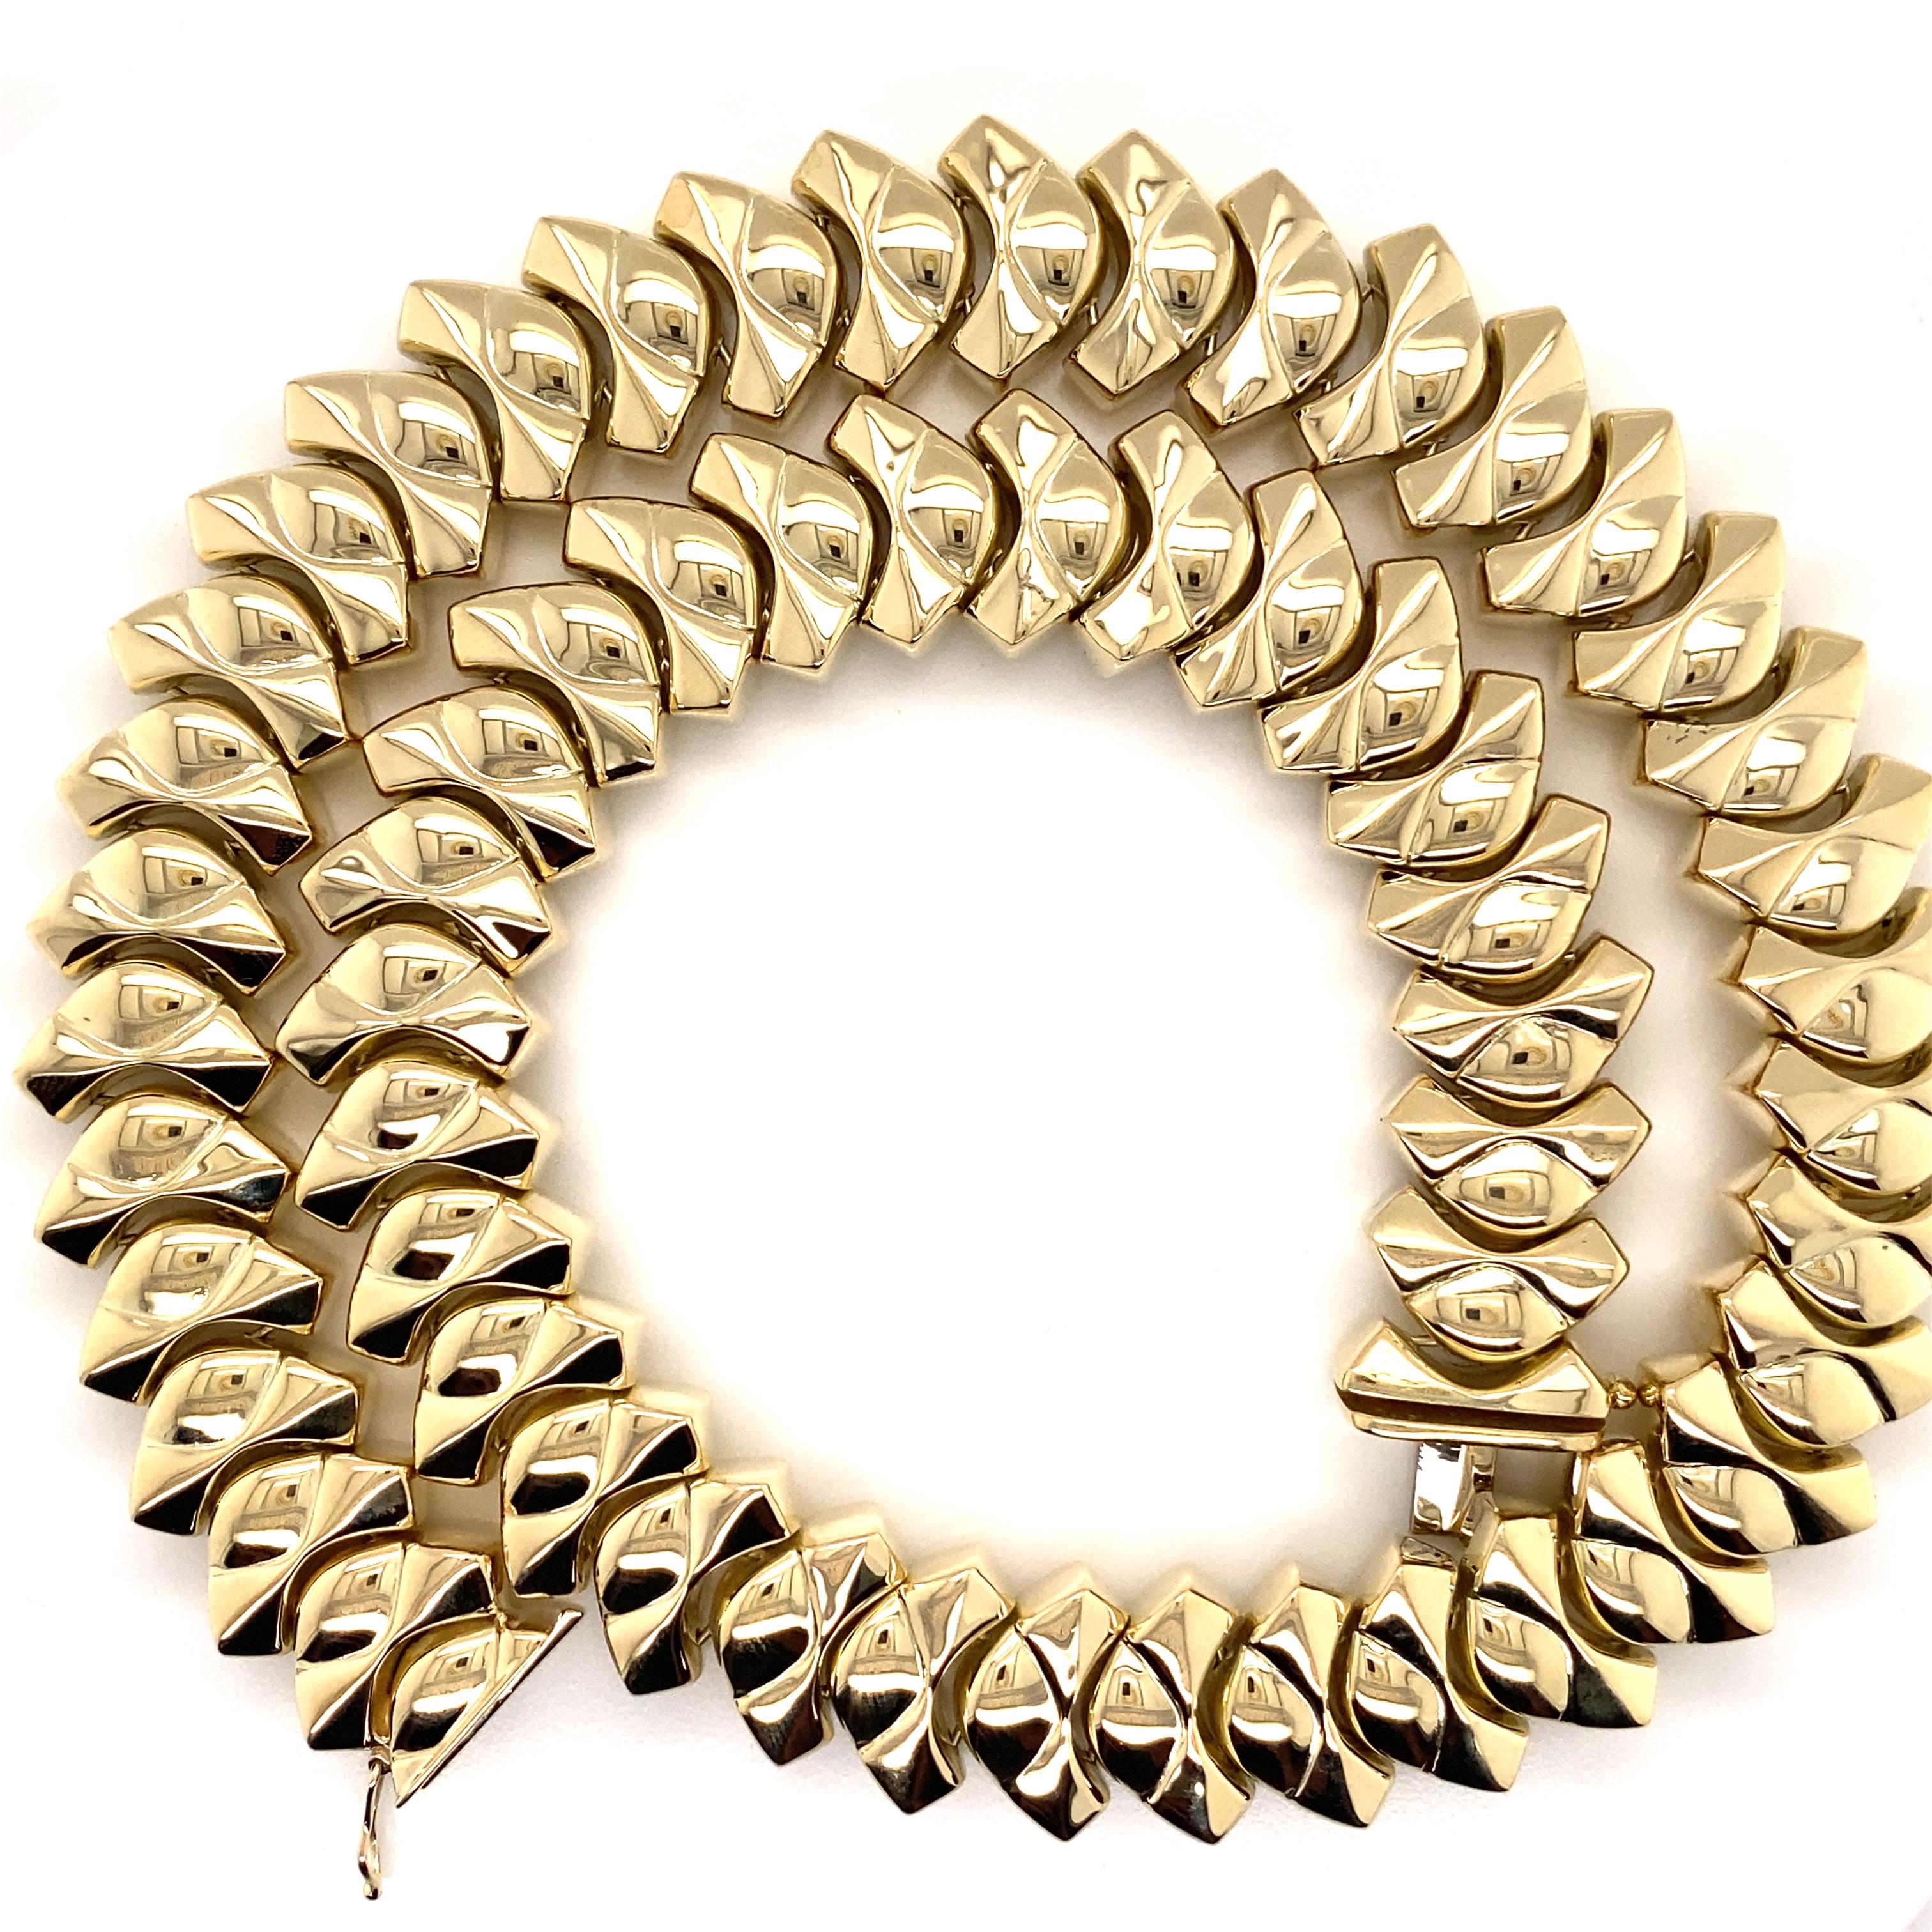 Vintage 1990's 14K Yellow Gold Italian Bold Link Choker Necklace - The Italian made necklace is 15mm wide and 16 inches long and features a hidden plunger clasp with a figure 8 safety. The necklace weighs 74.3 grams.